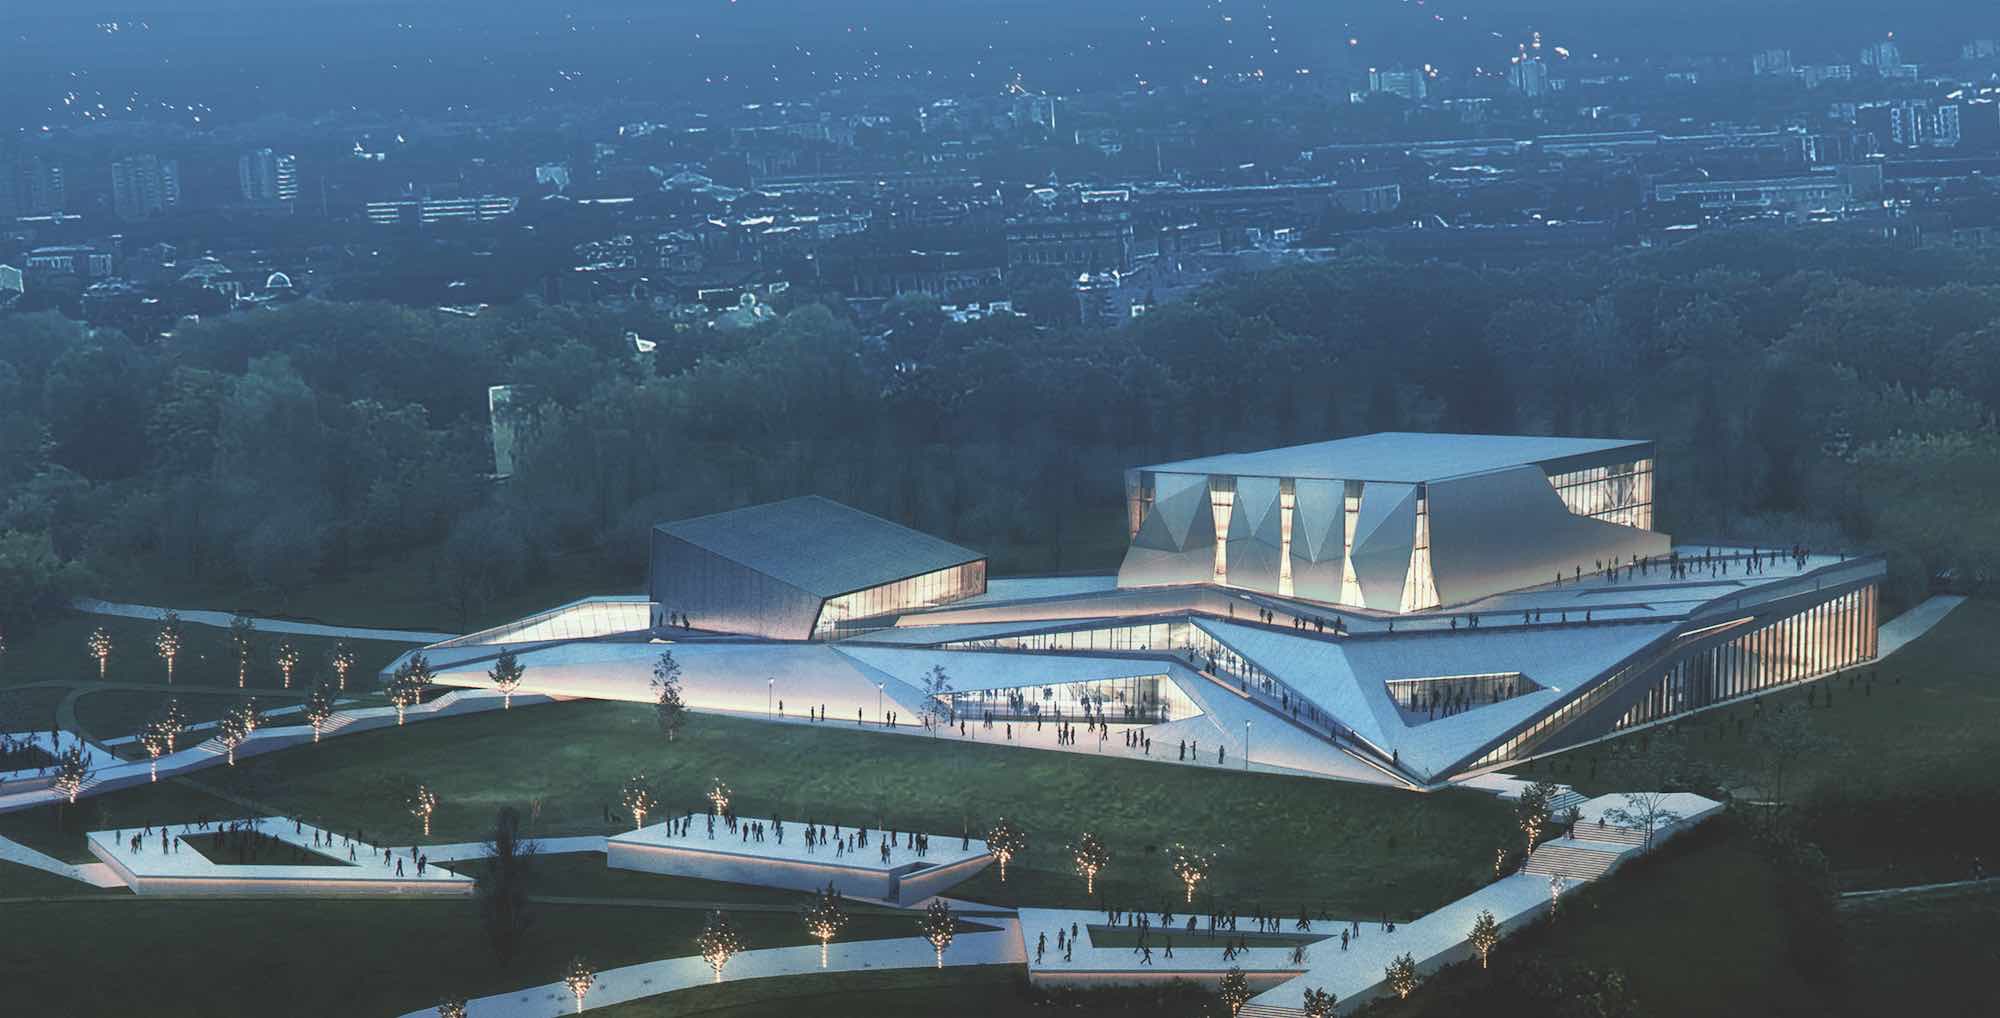 Vilnius Concert Hall in Lithuania by